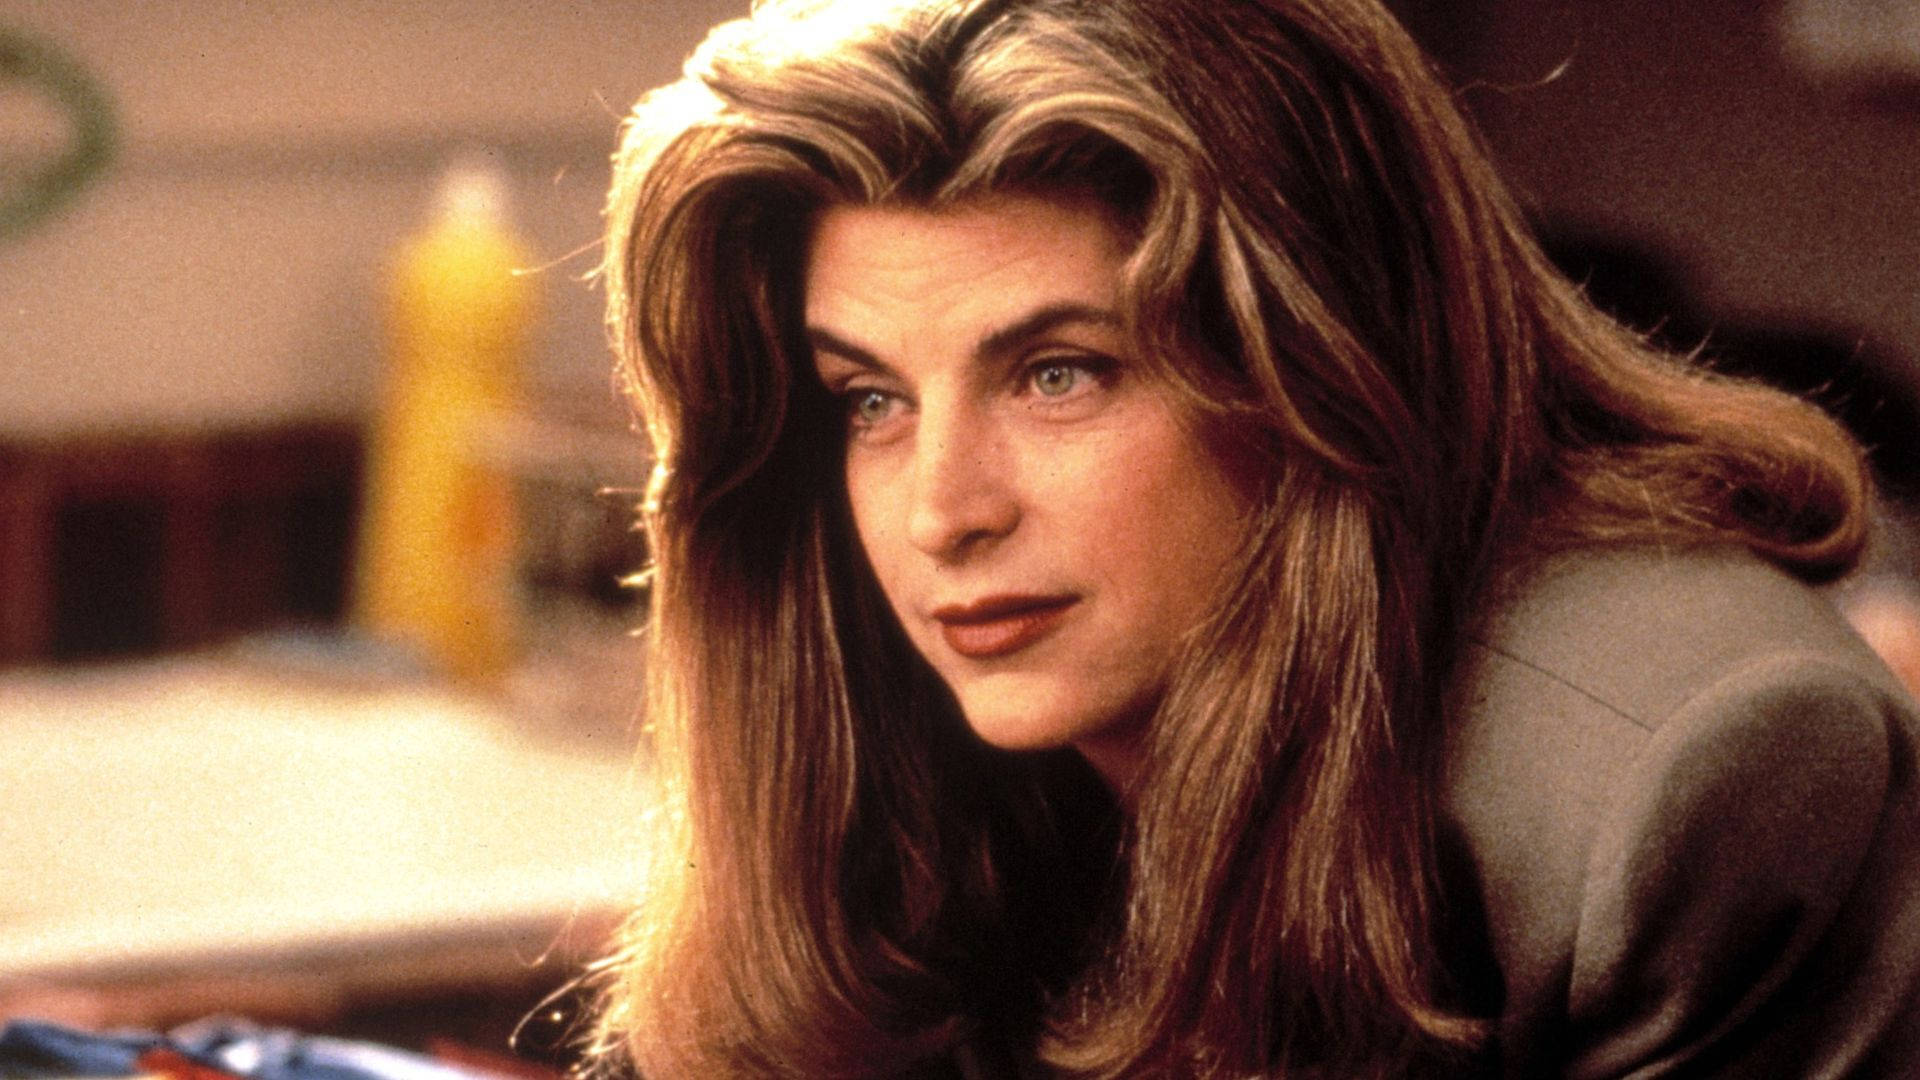 Young American Actress Kirstie Alley With A Classic Hairstyle Wallpaper